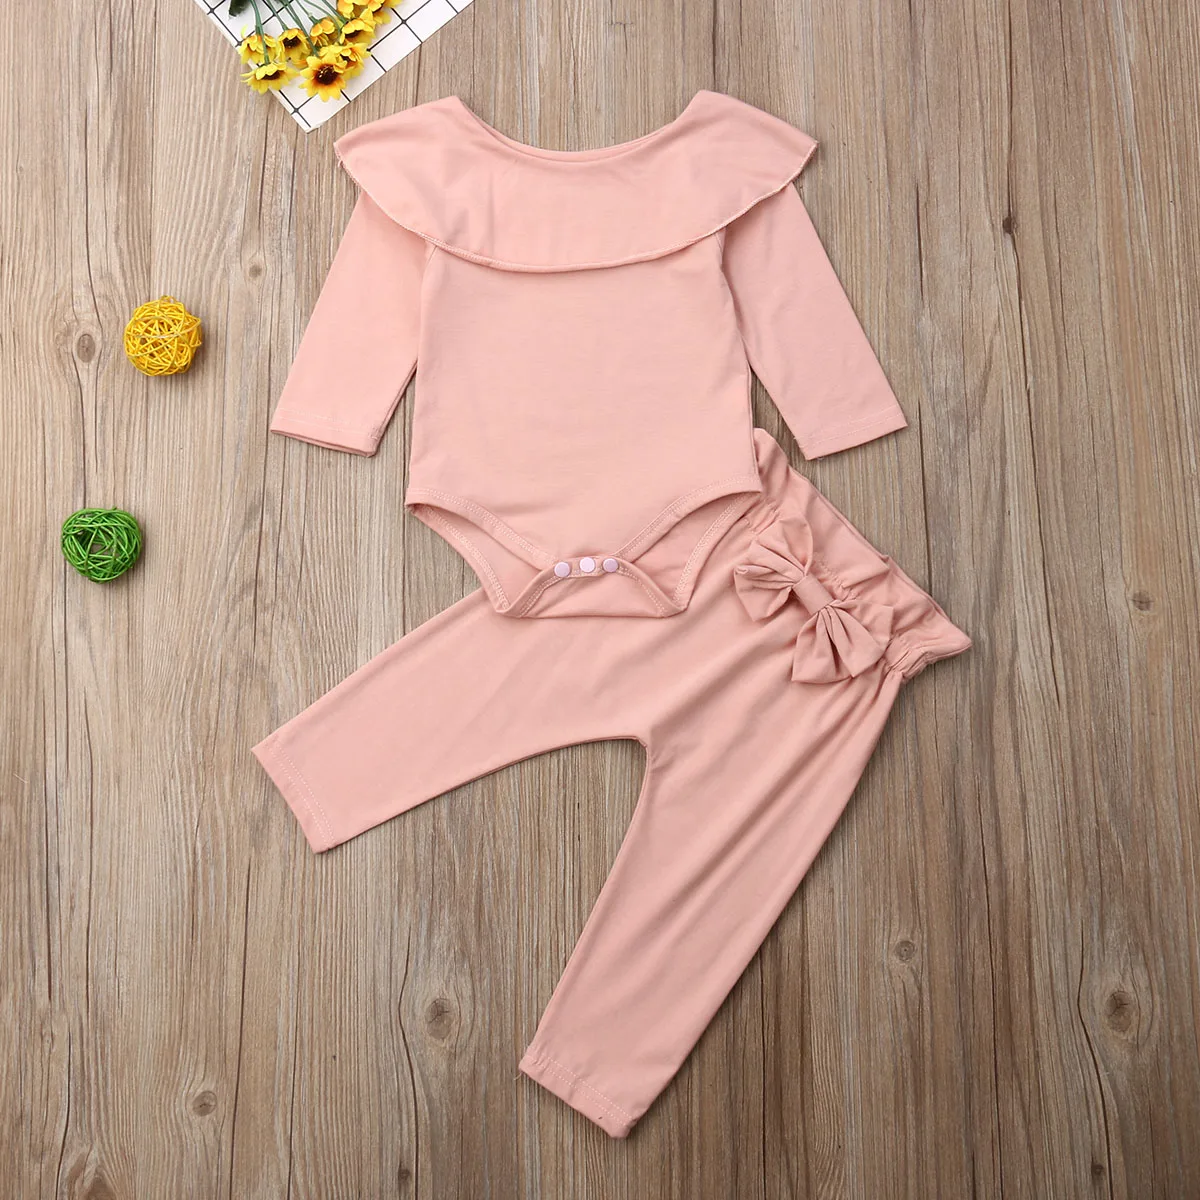 

Pudcoco Newborn Baby Girl Clothes Solid Color Off Shoulder Ruffle Romper Tops Long Pants 2Pcs Outfits Soft Cotton Clothes